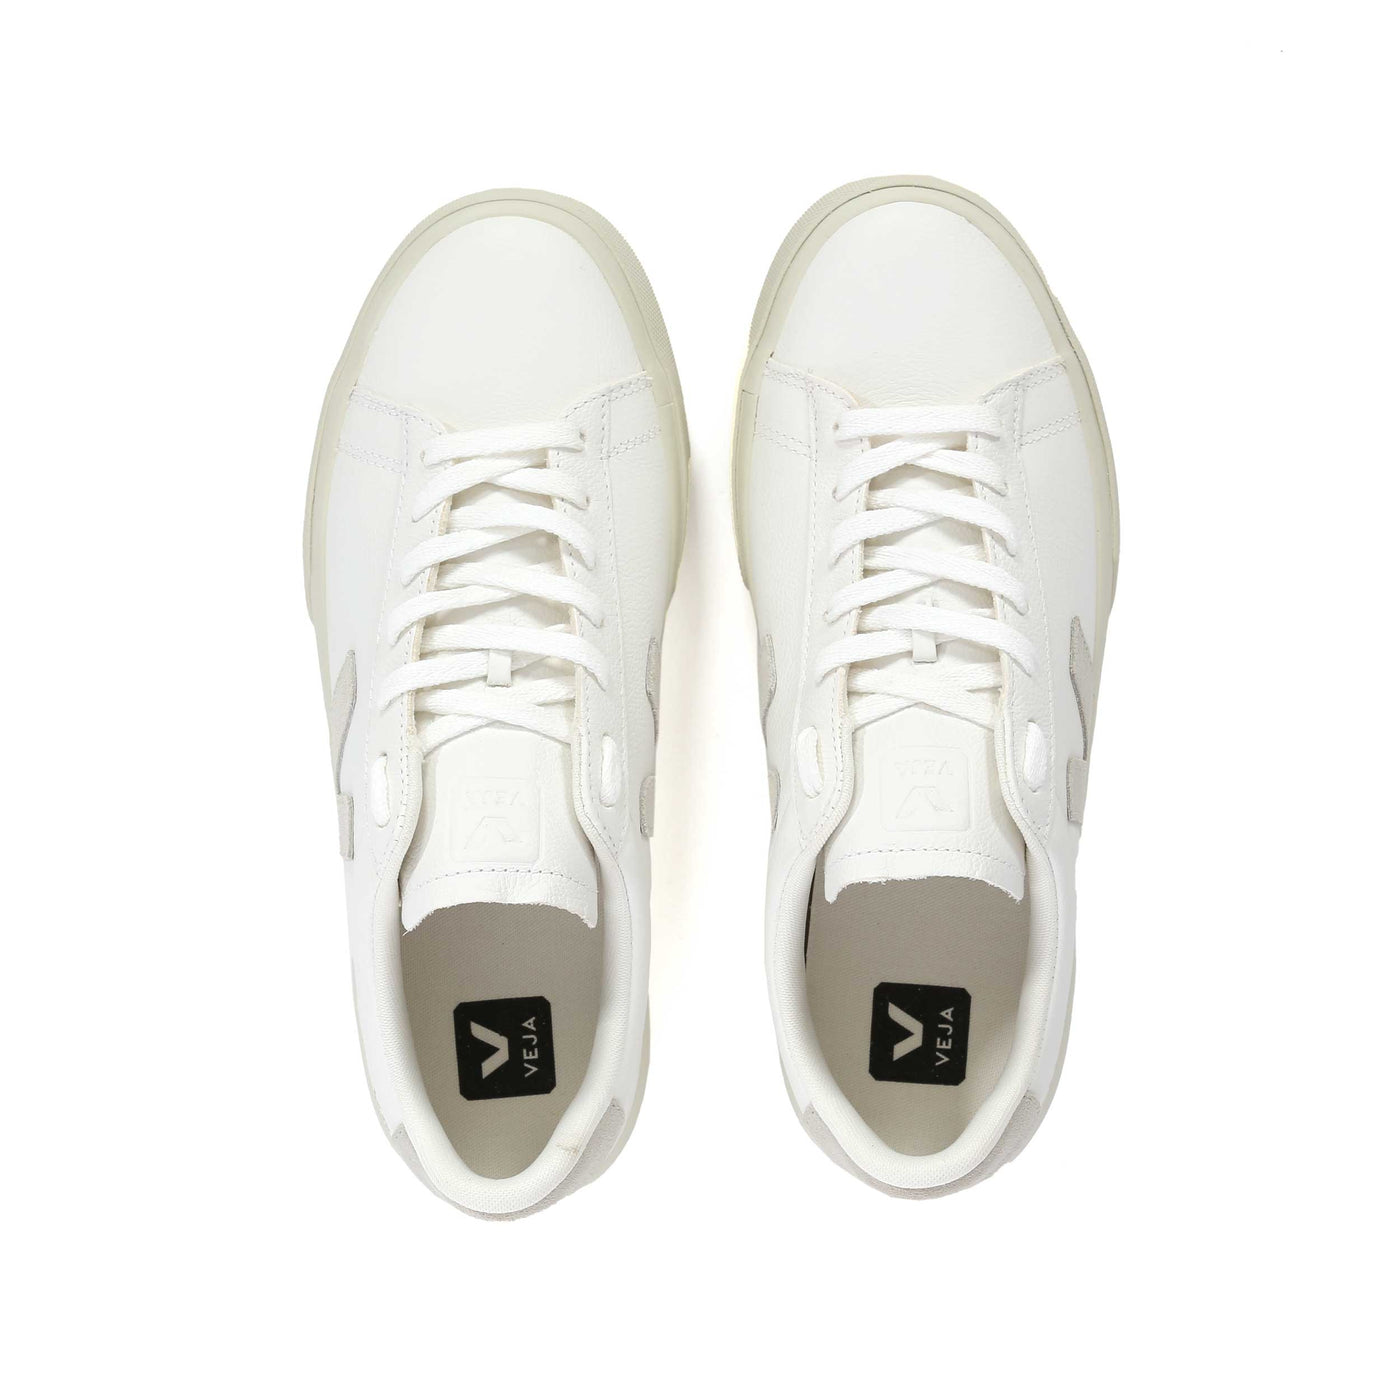 Veja Campo Trainer in Extra White & Natural Suede Birdseye